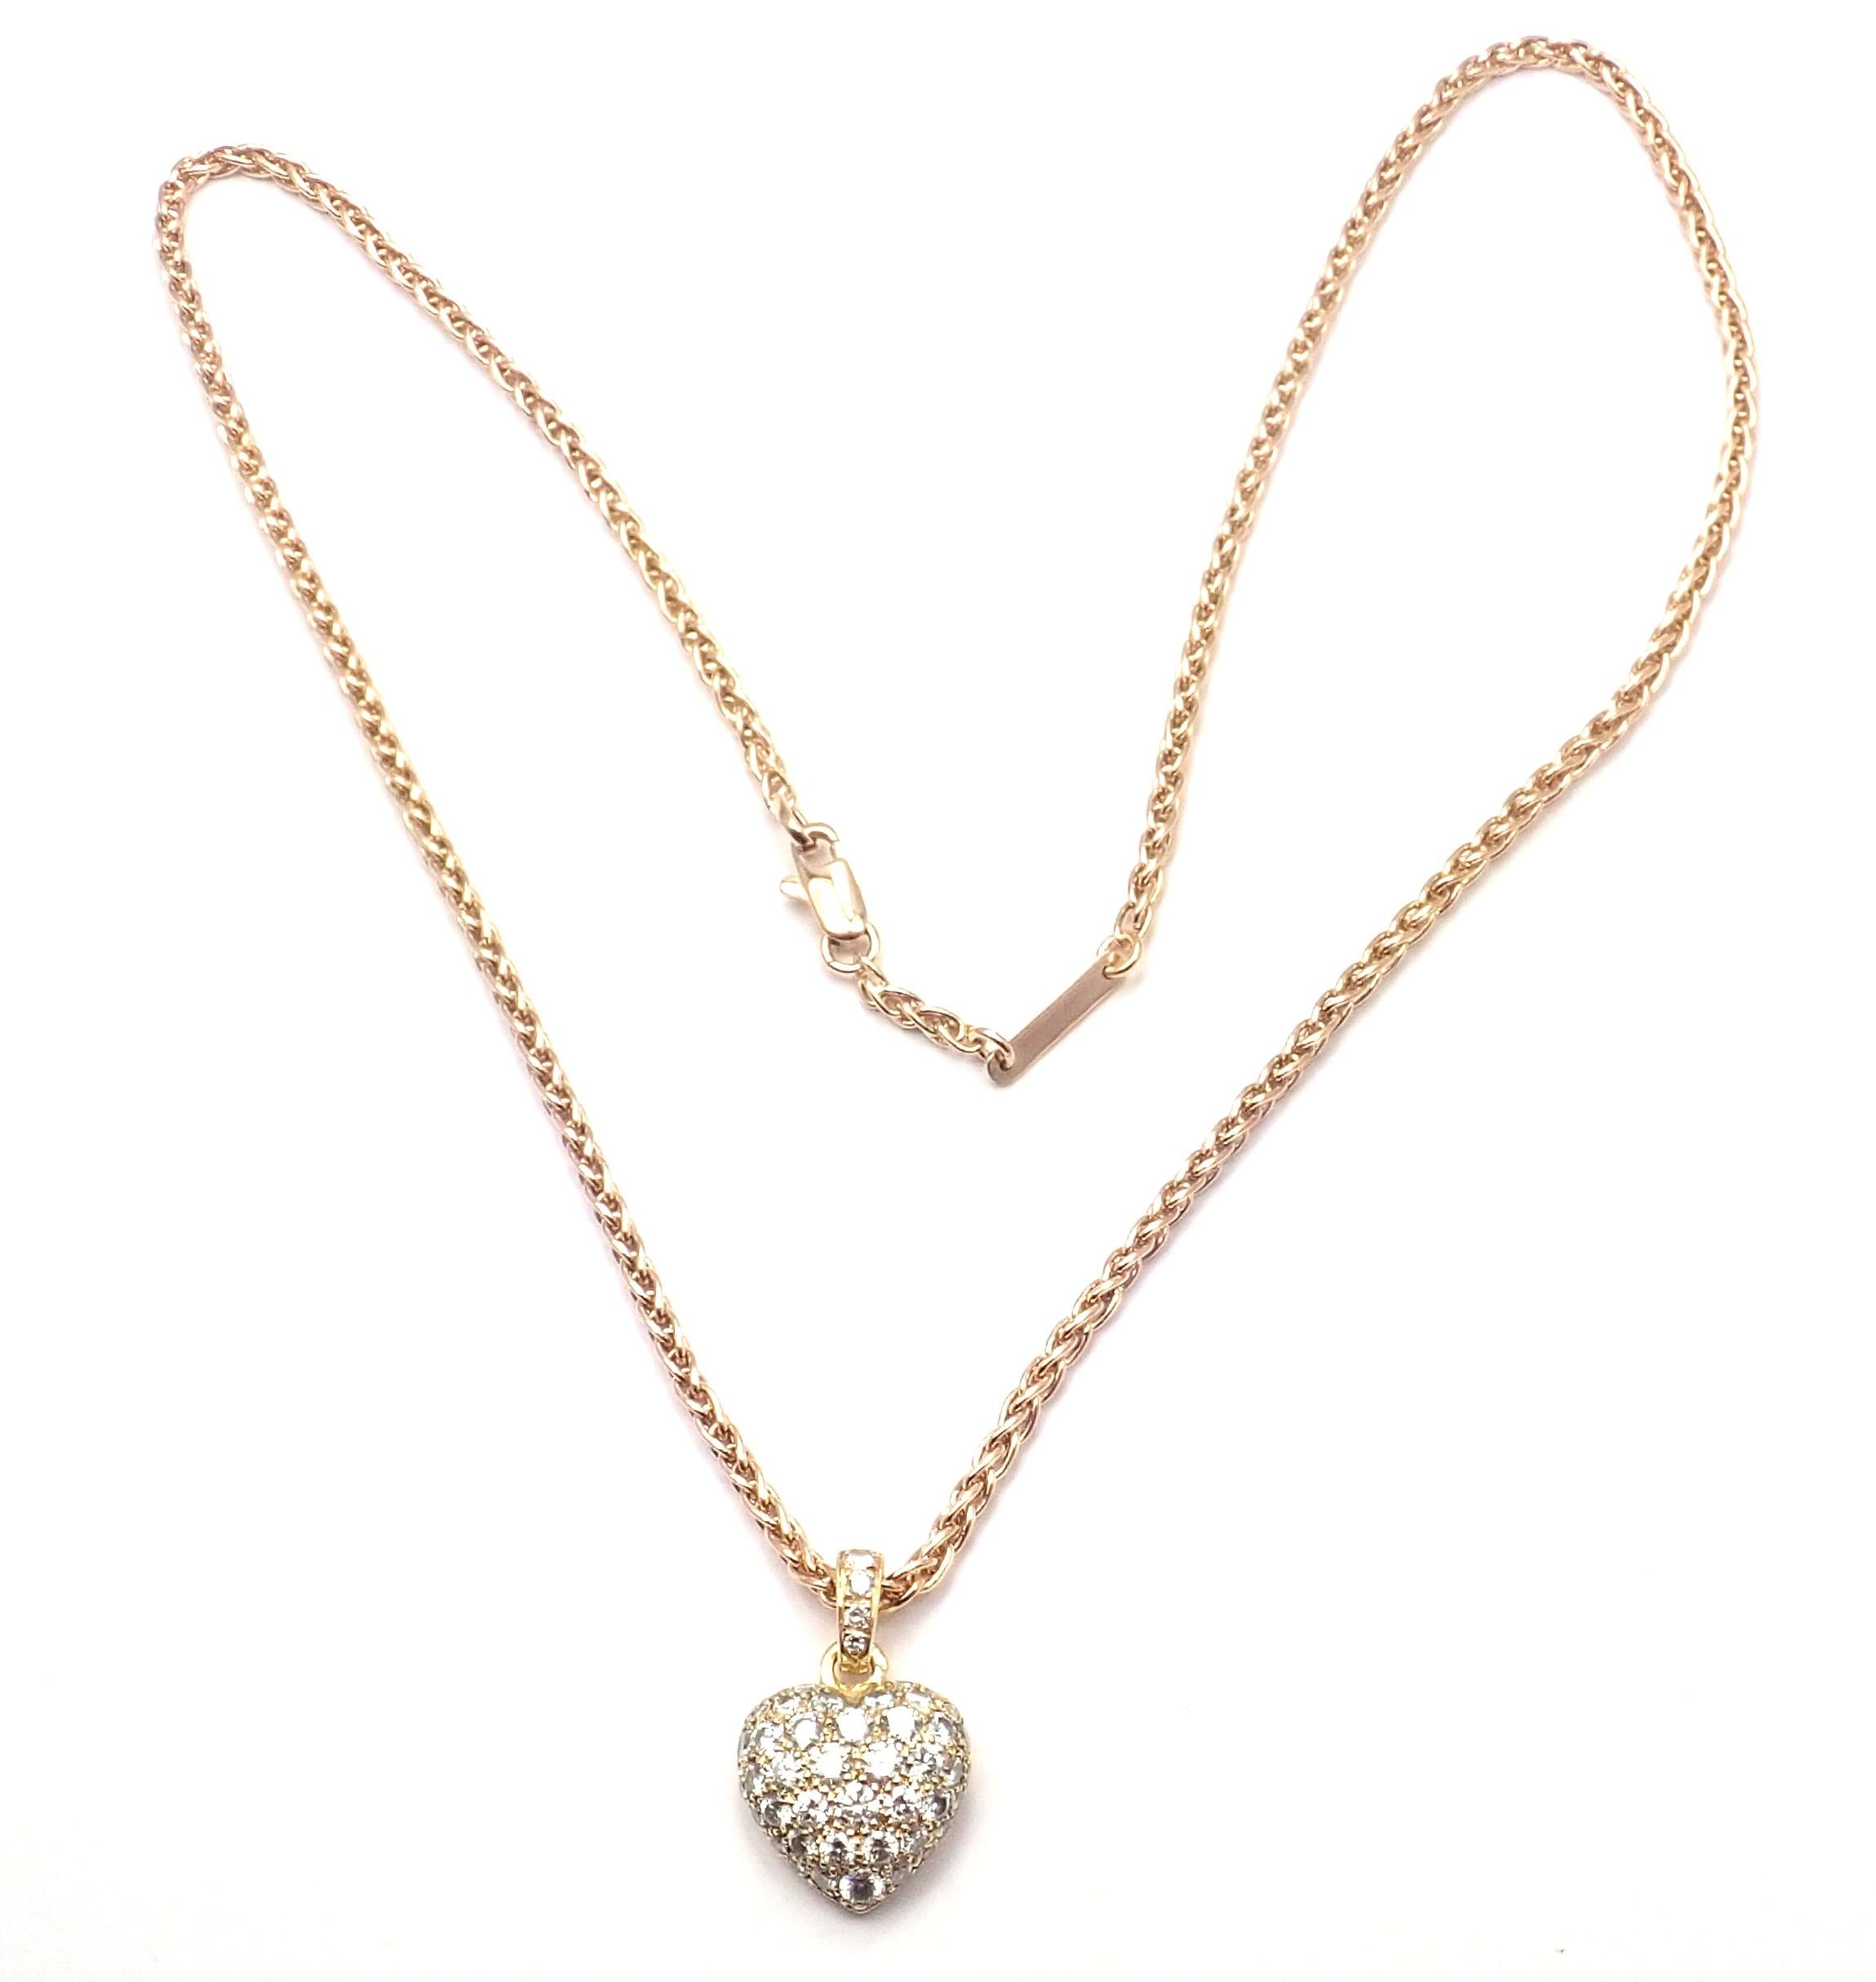 18k Yellow Gold Diamond Pave Heart Pendant Necklace by Cartier.
With Round brilliant cut diamonds VS1 clarity E color total weight approx. 2ct
Details:
Weight: 14.7 grams
Pendant Size: 22mm x 14mm
Width: 2mm
Length: 17.5